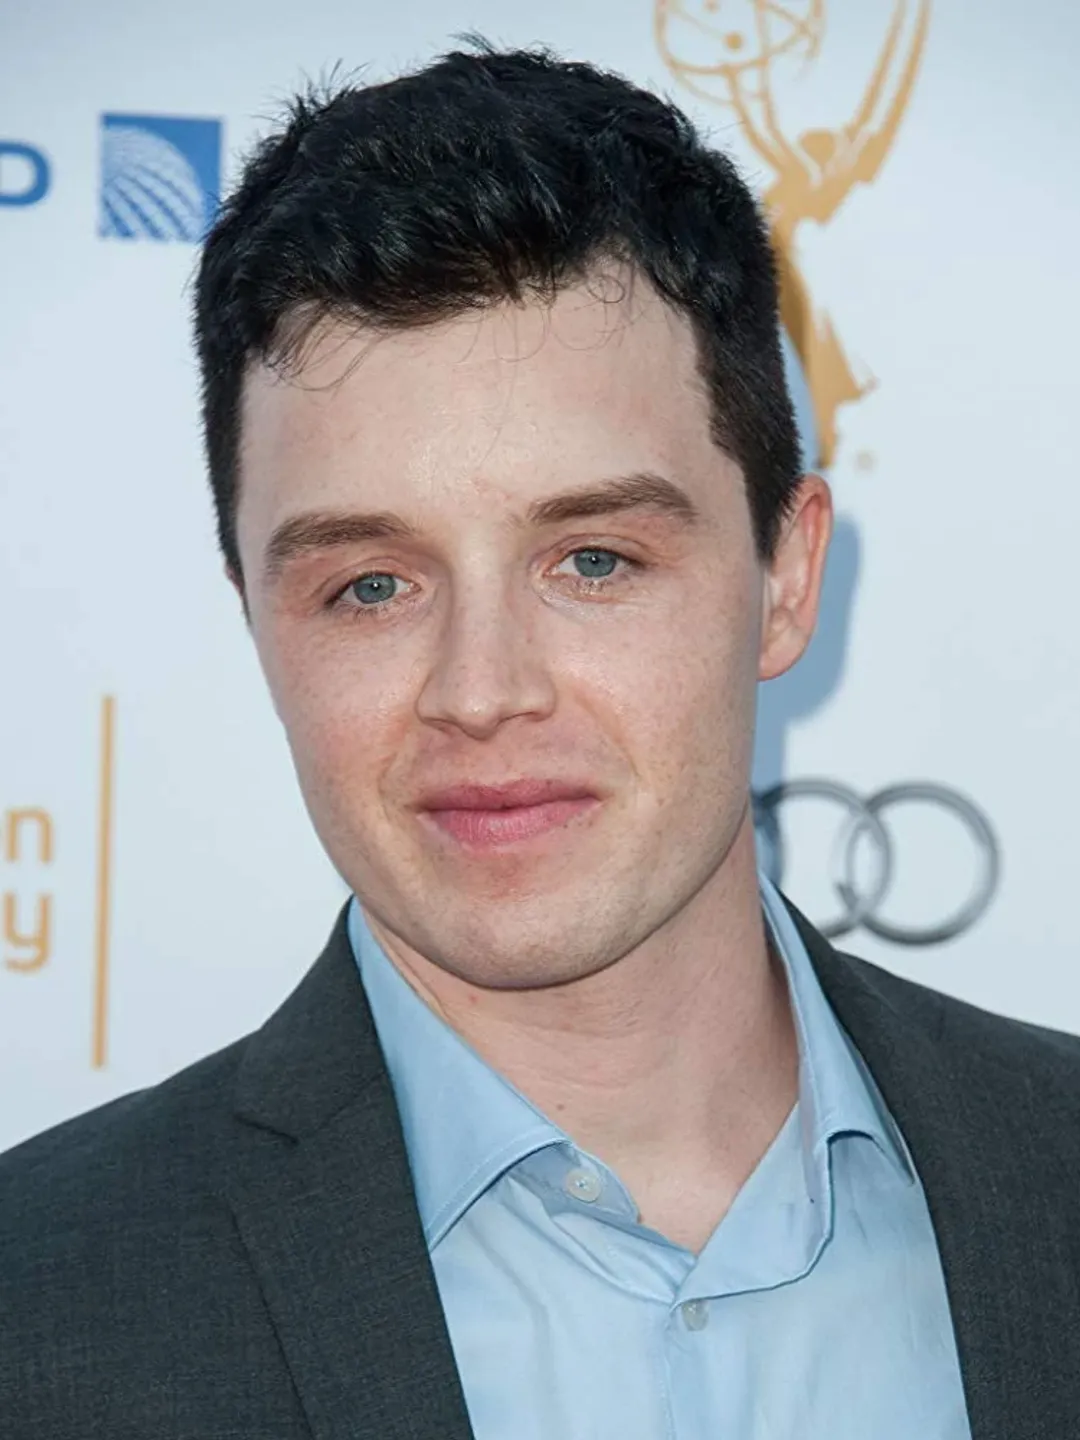 Noel Fisher who is his mother